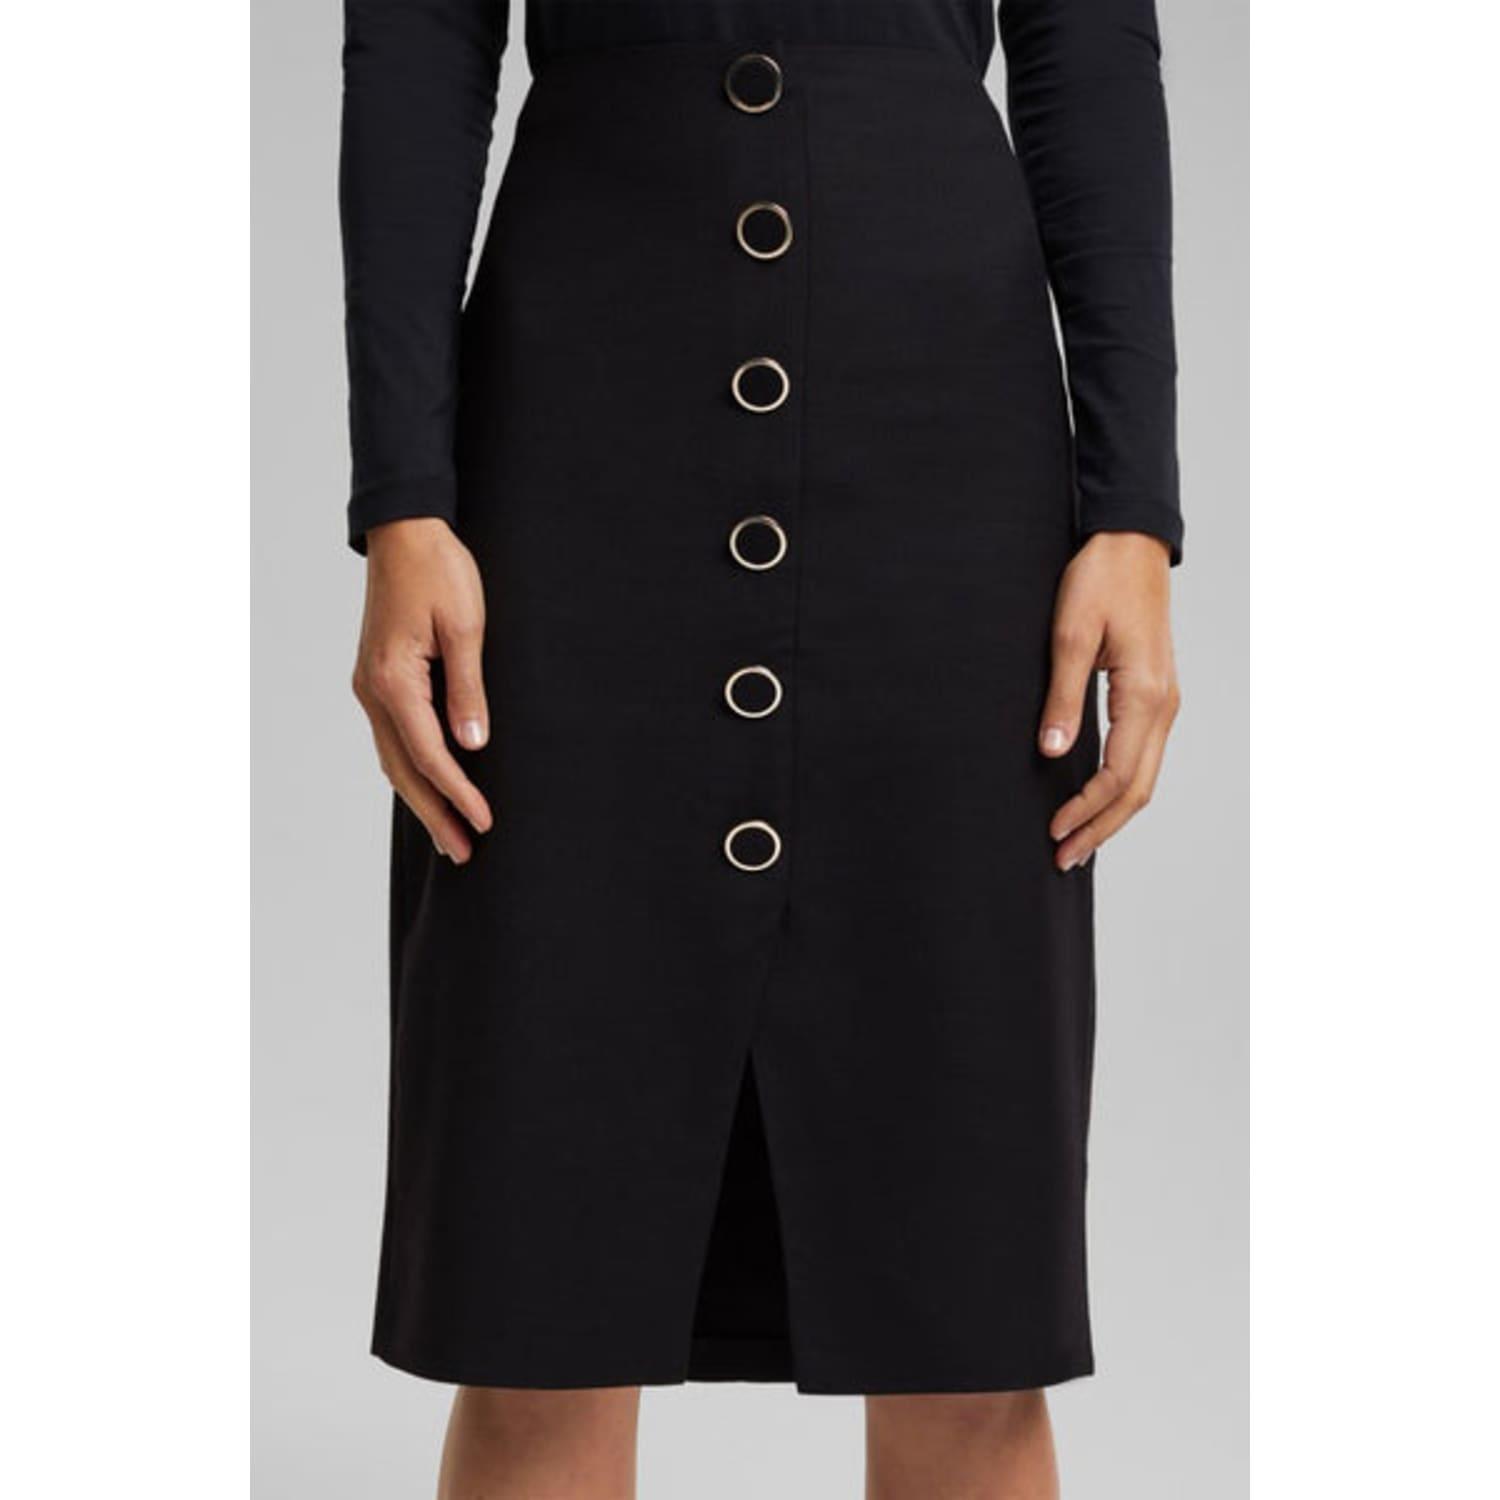 Esprit Pencil Skirt With Buttons in Black | Lyst